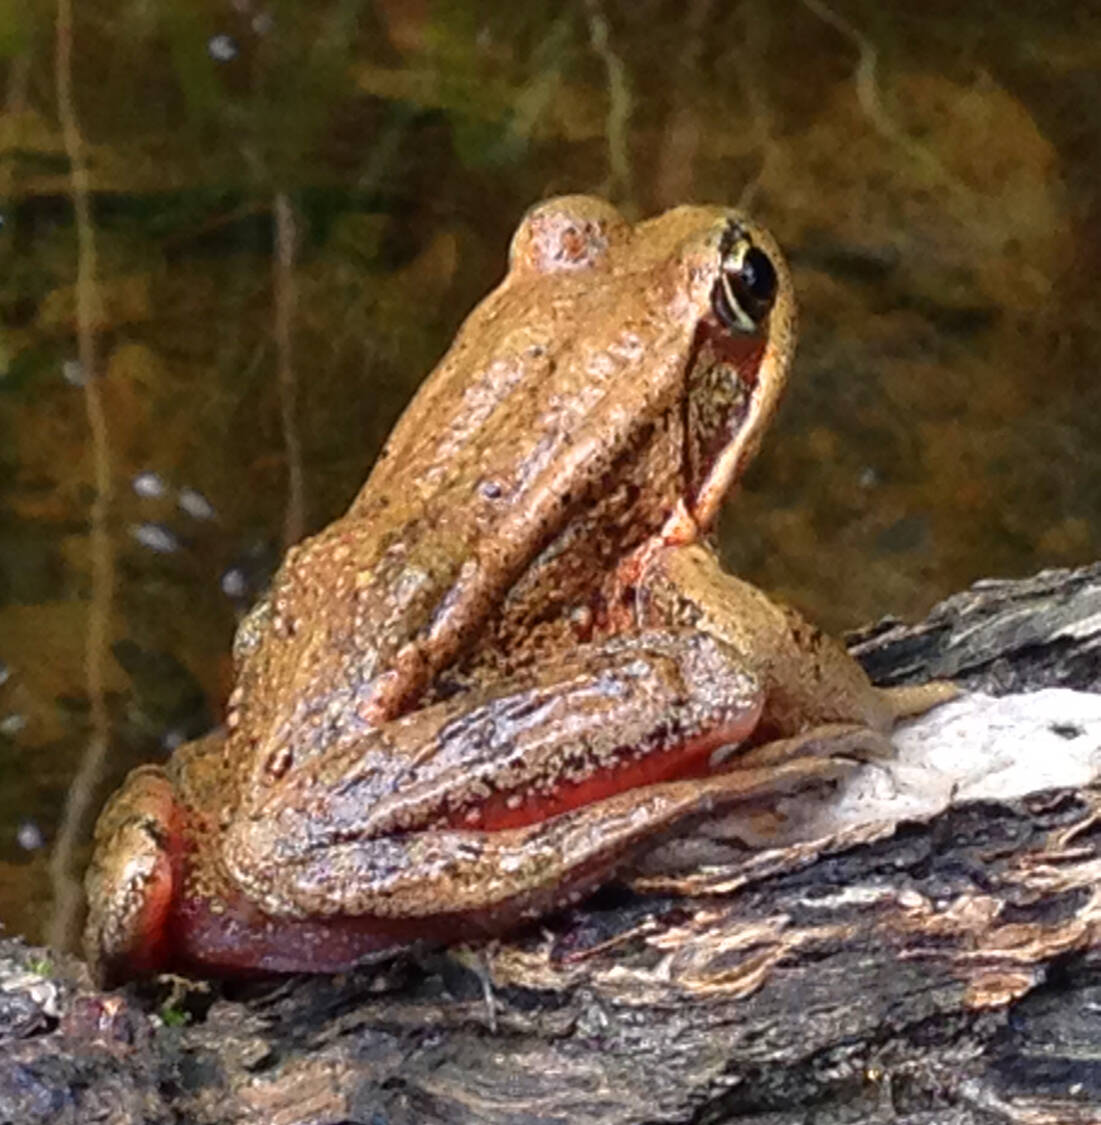 A northern red-legged Frog. Photo by Robin Doty Blymyer